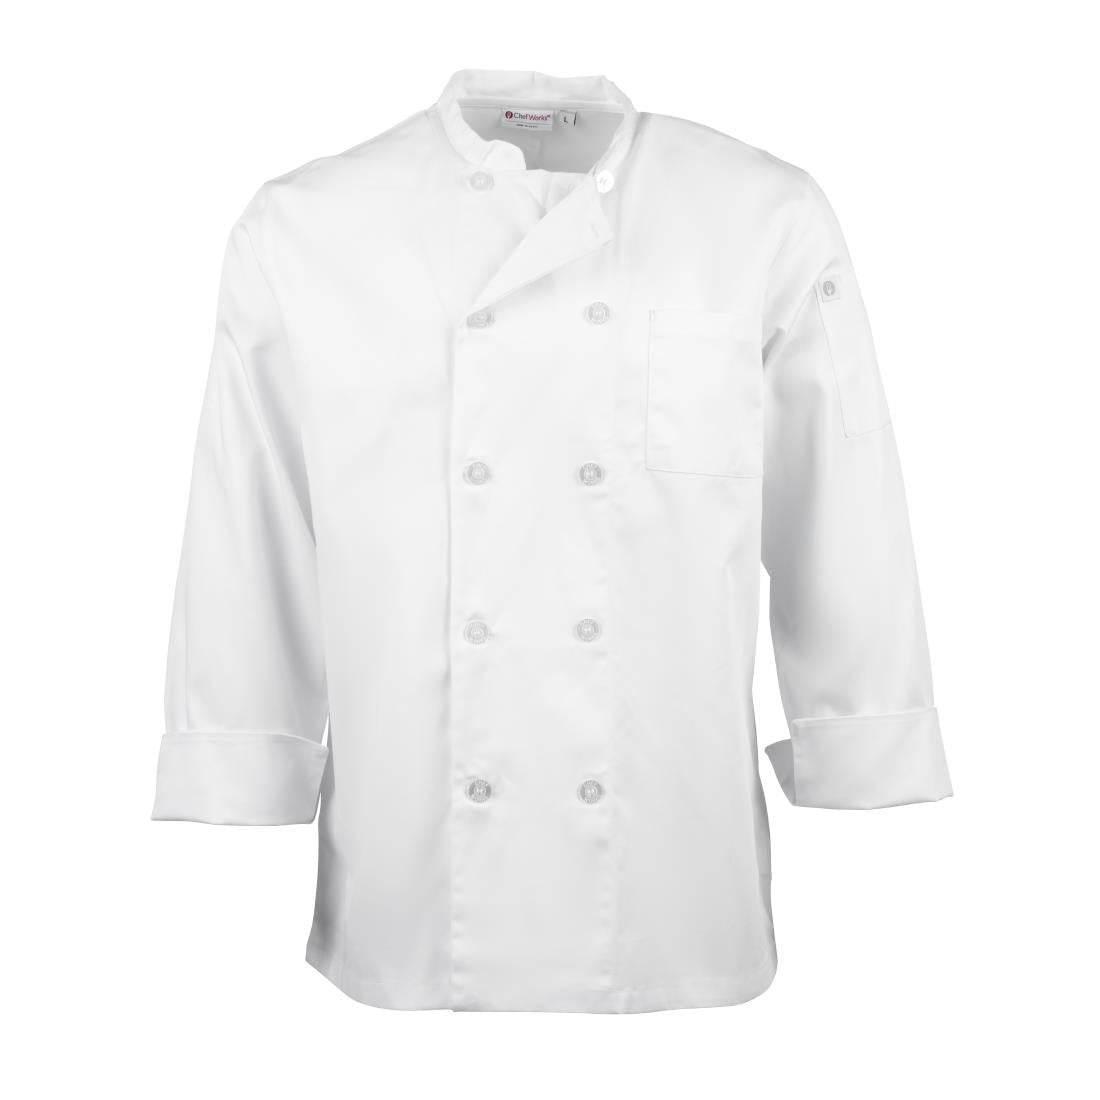 A371-8XL Chef Works Le Mans Chefs Jacket White 8XL JD Catering Equipment Solutions Ltd